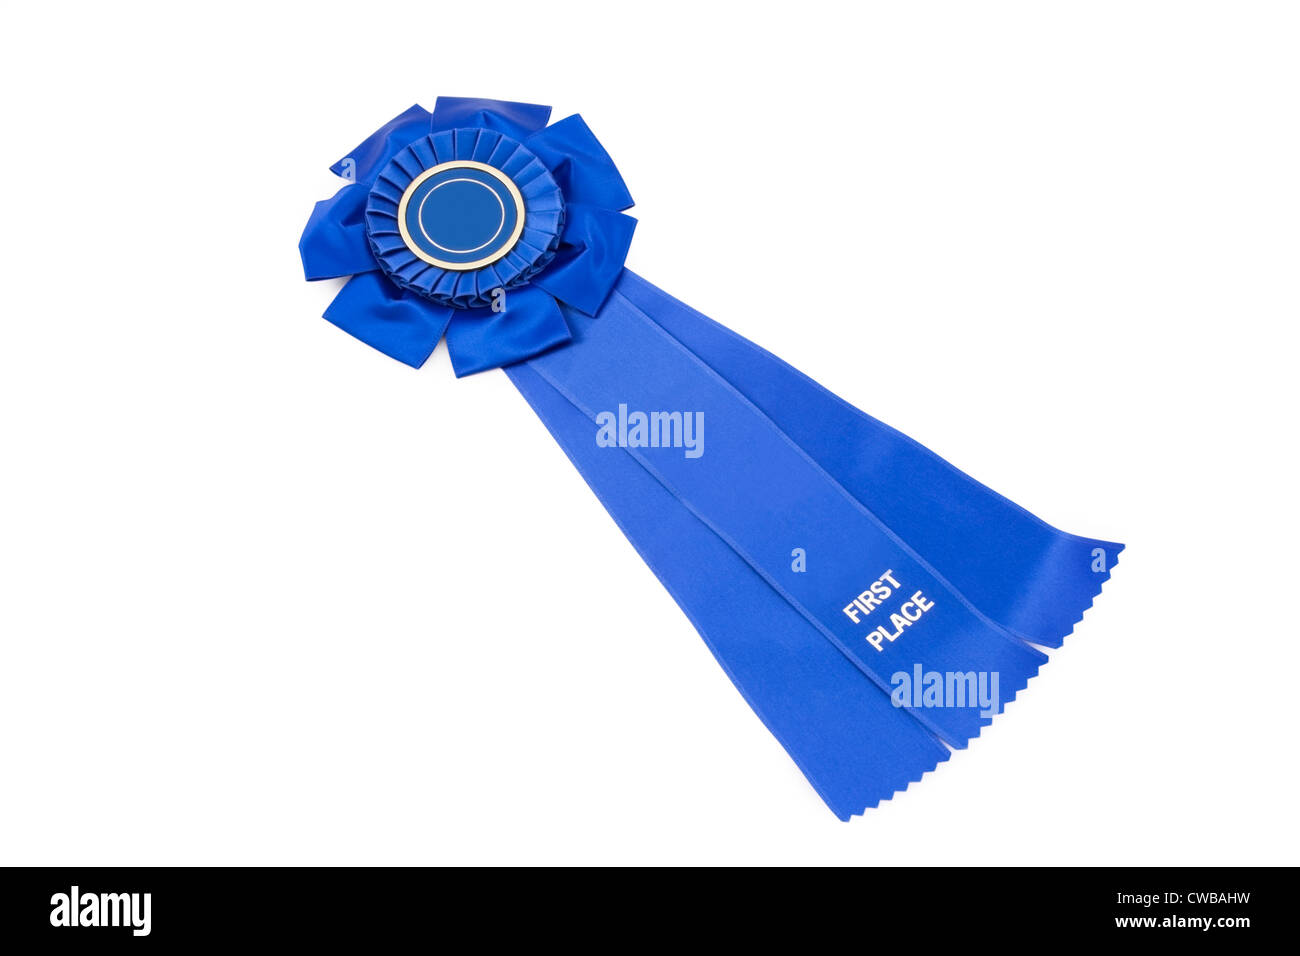 First Place award ribbon on white background. Stock Photo